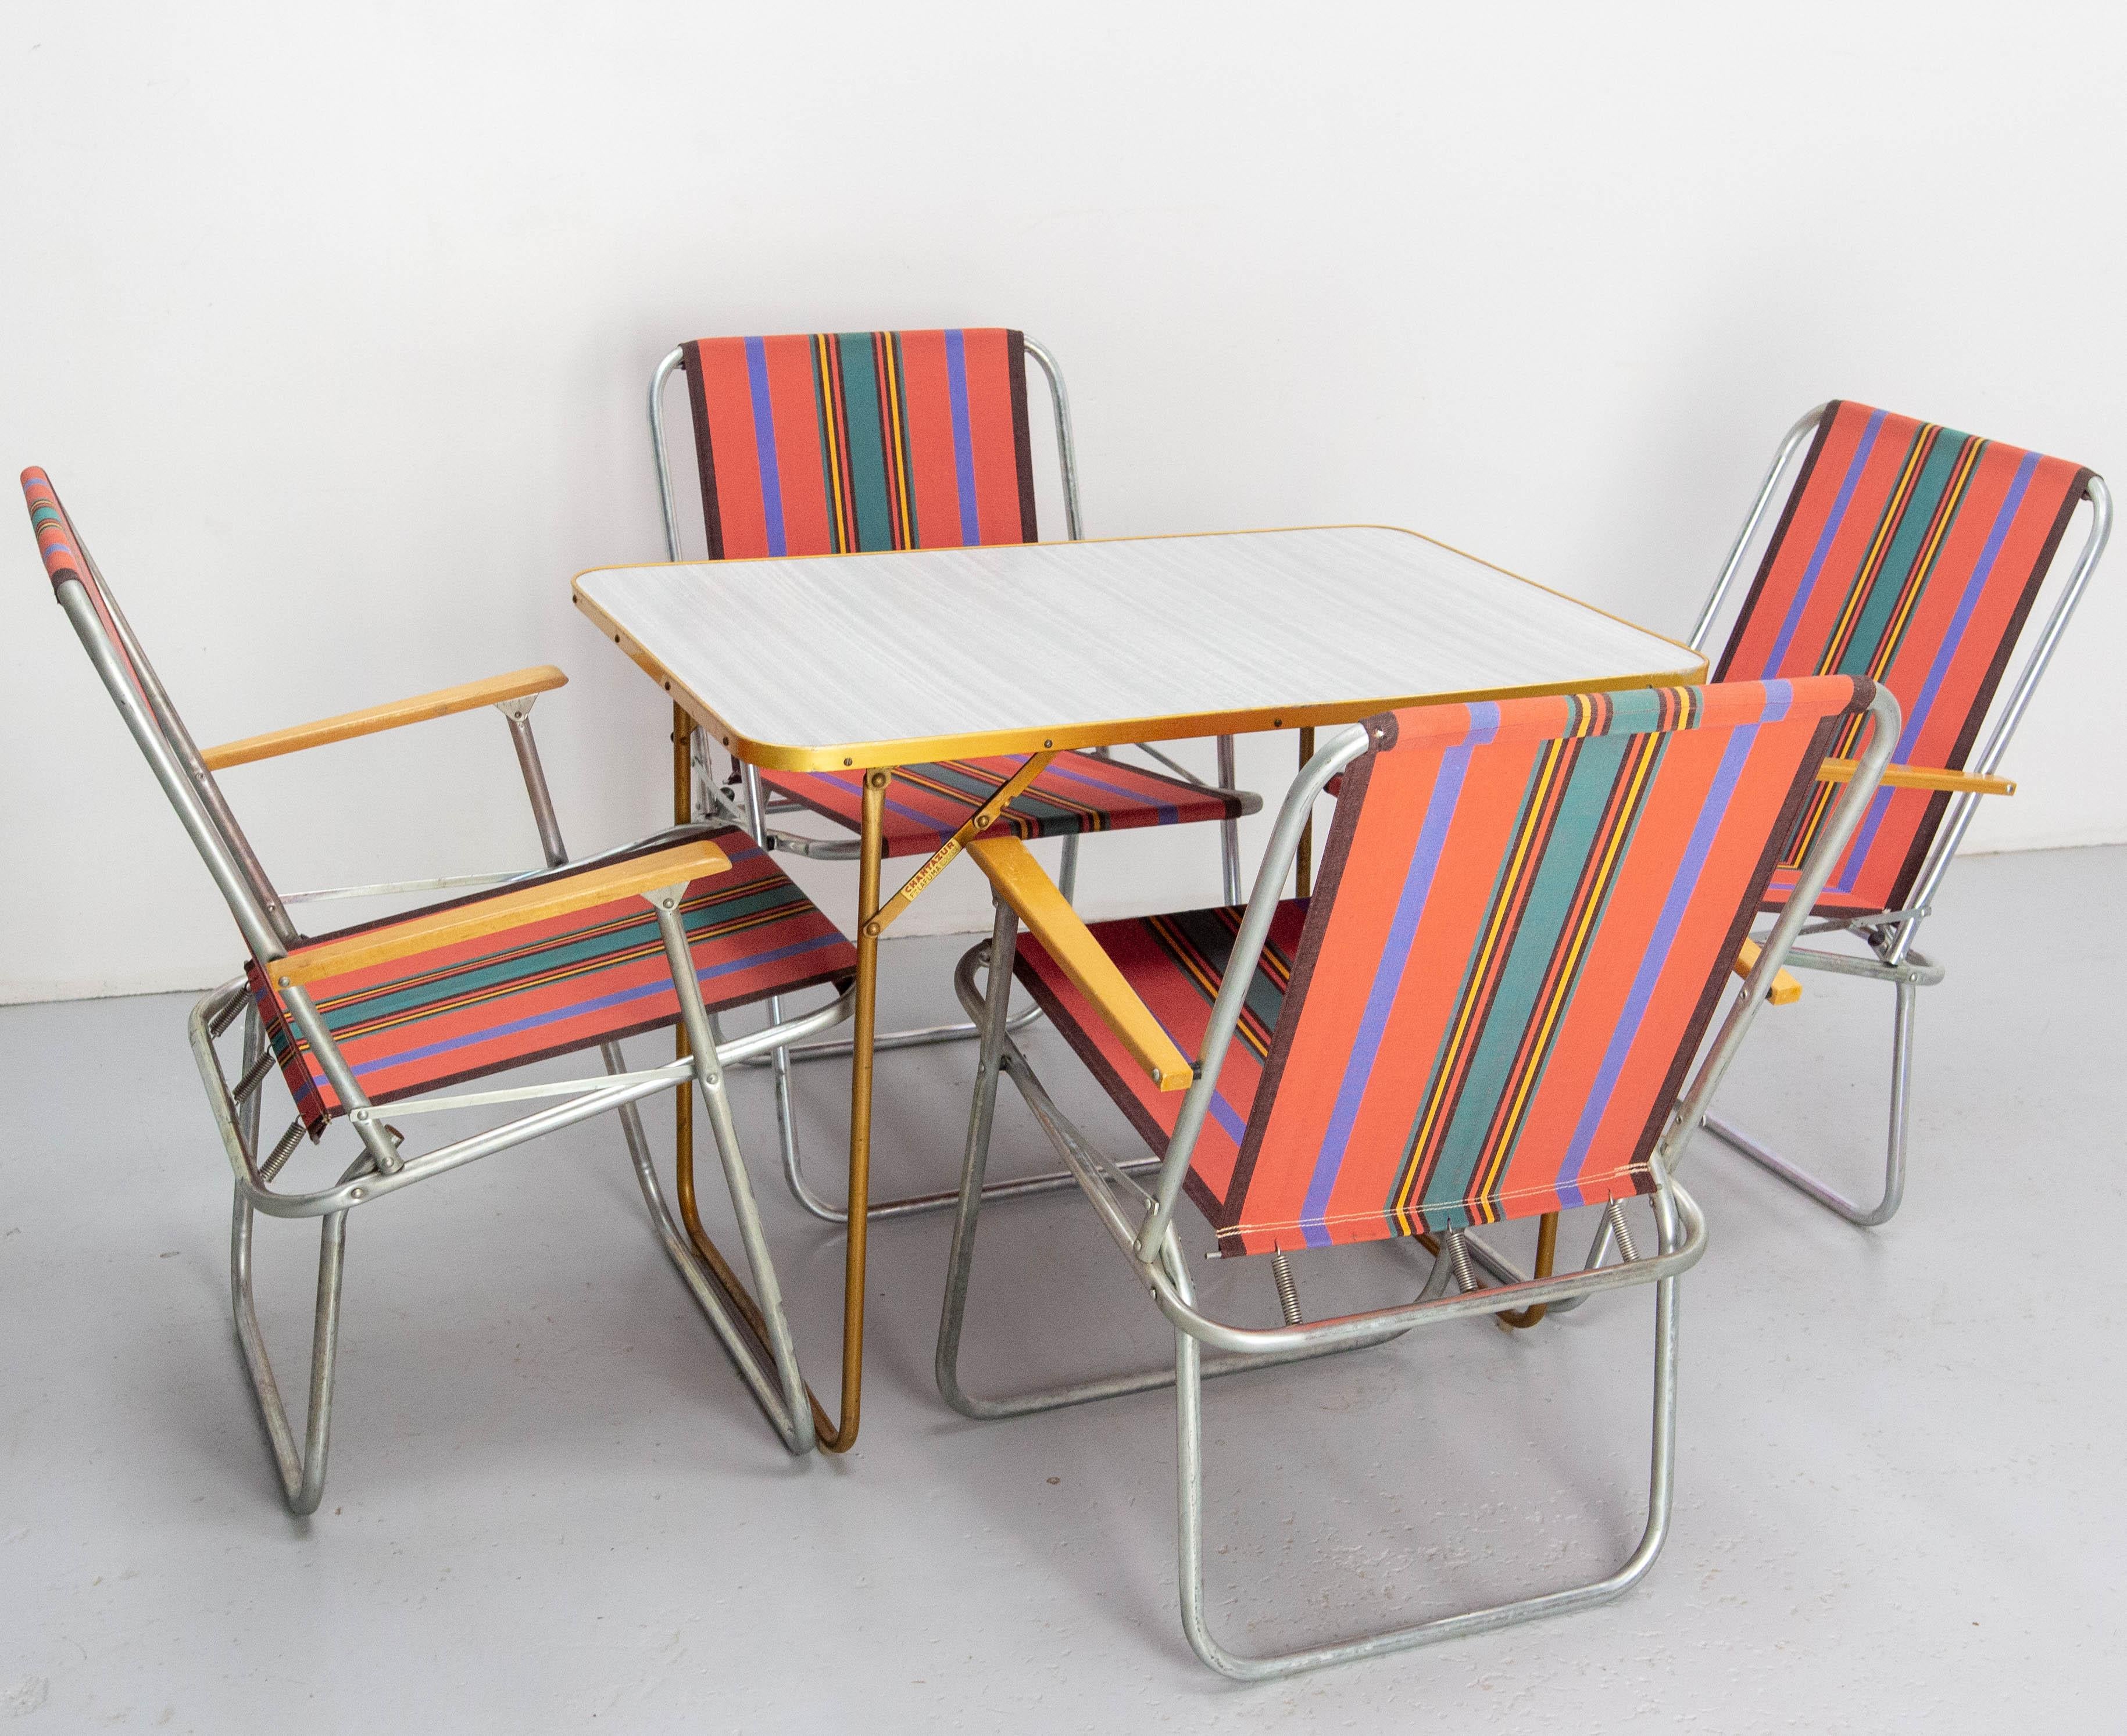 French folding four chairs and table, typical of the fifties, brand Chantazur Lafuma.
Good condition patina the fabric is the original and it is in very good condition.
Each piece is fold-able.
Dimension: 
chairs: D 24.41, W 22.05 H 31.50 in. Seat H